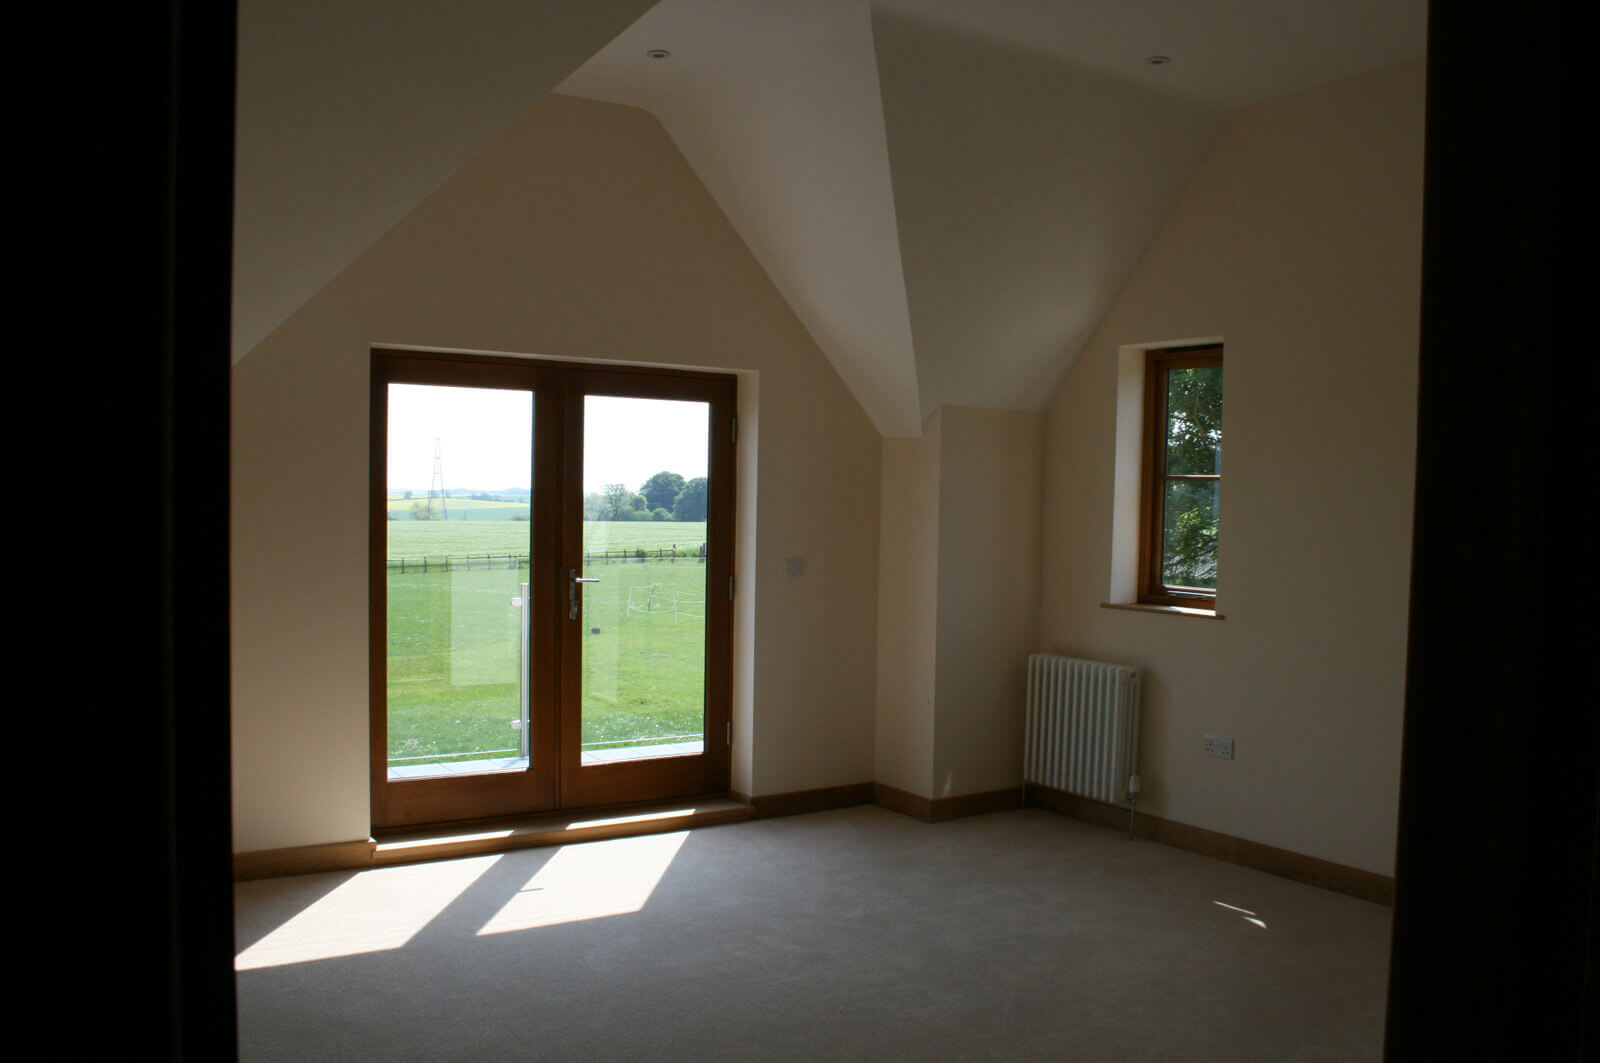 Bright bedrrom with window overlooking countryside to the rear.